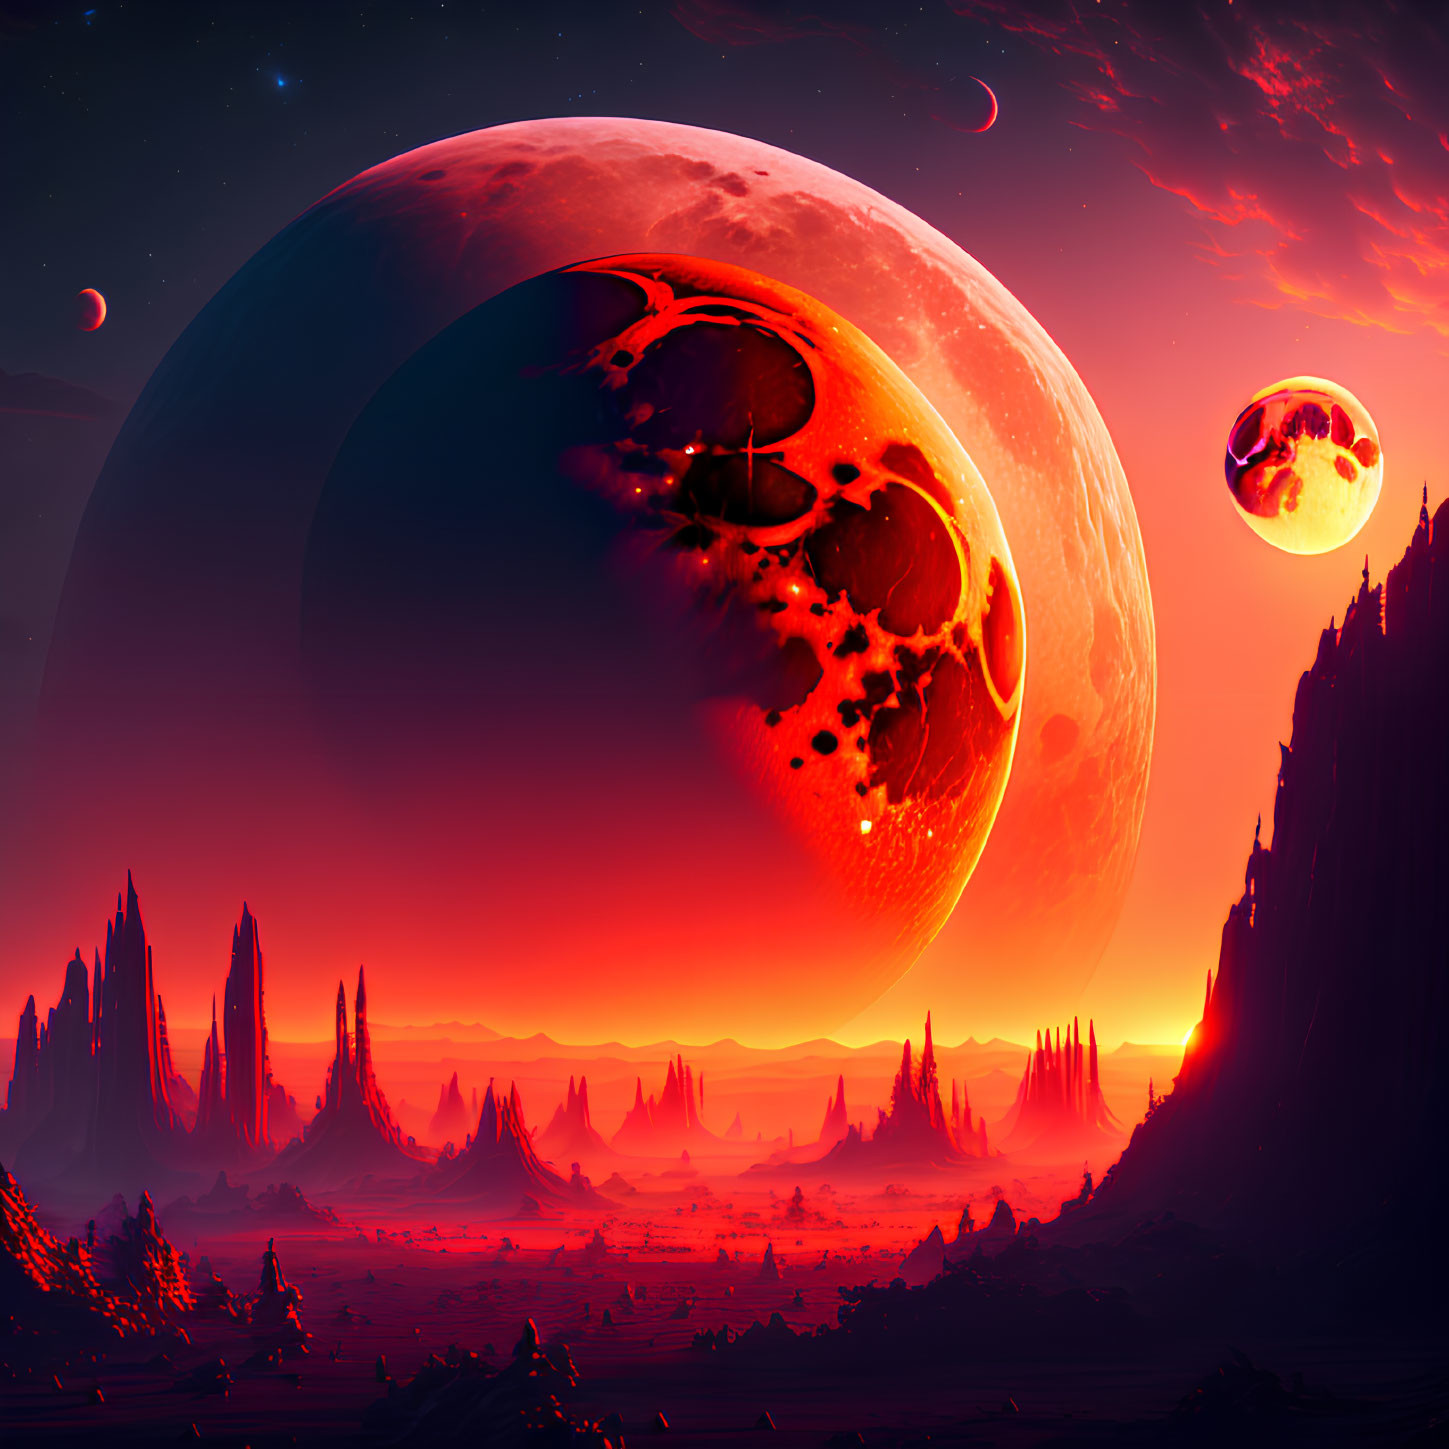 Sci-fi landscape with towering rock formations under a red sky